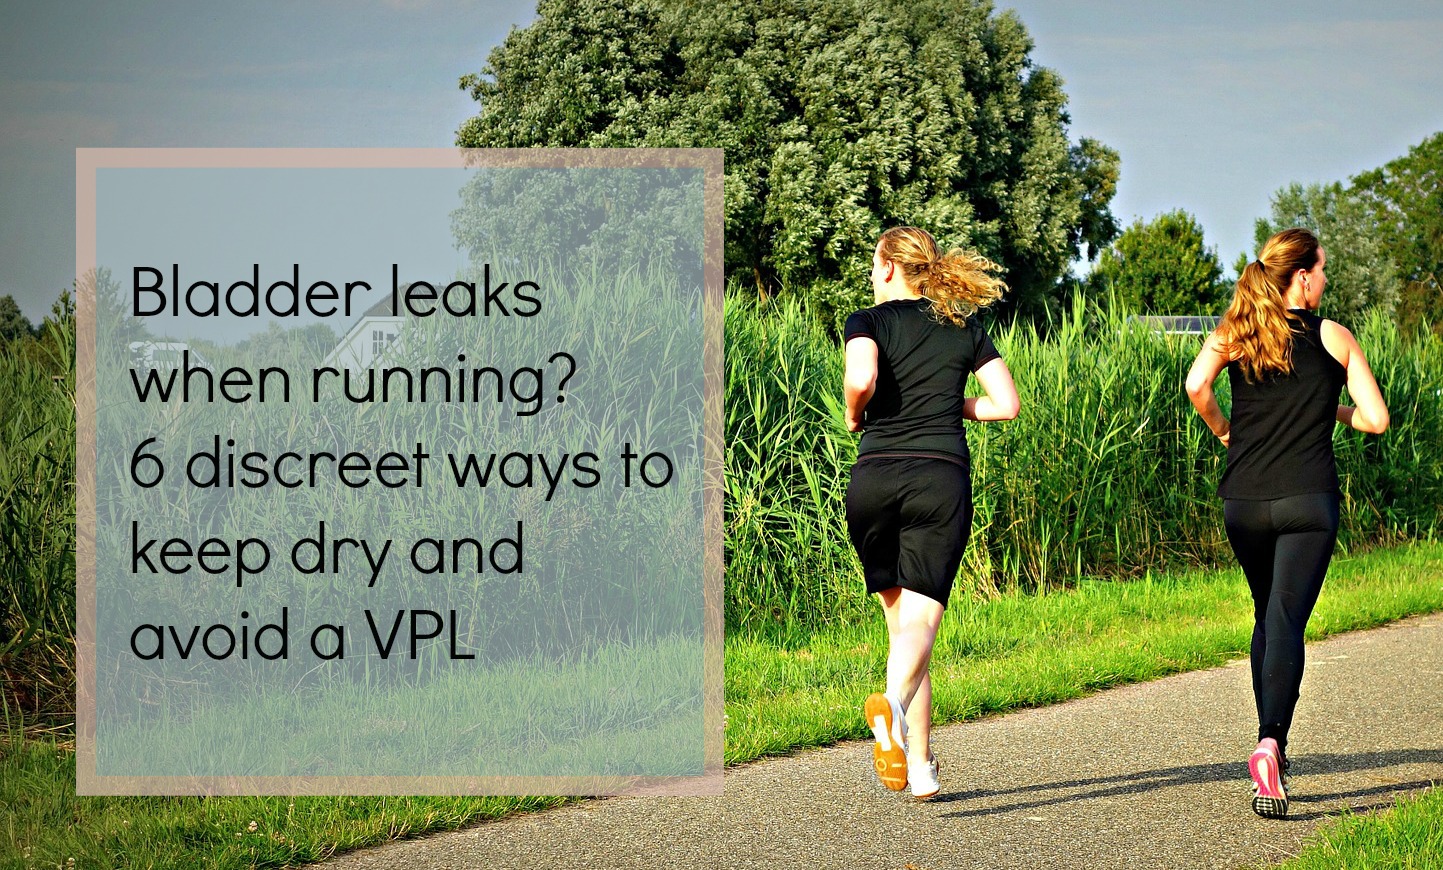 bladder leaks when running? 6 physio tips for discreet ways to stay dry and avoid a VPL